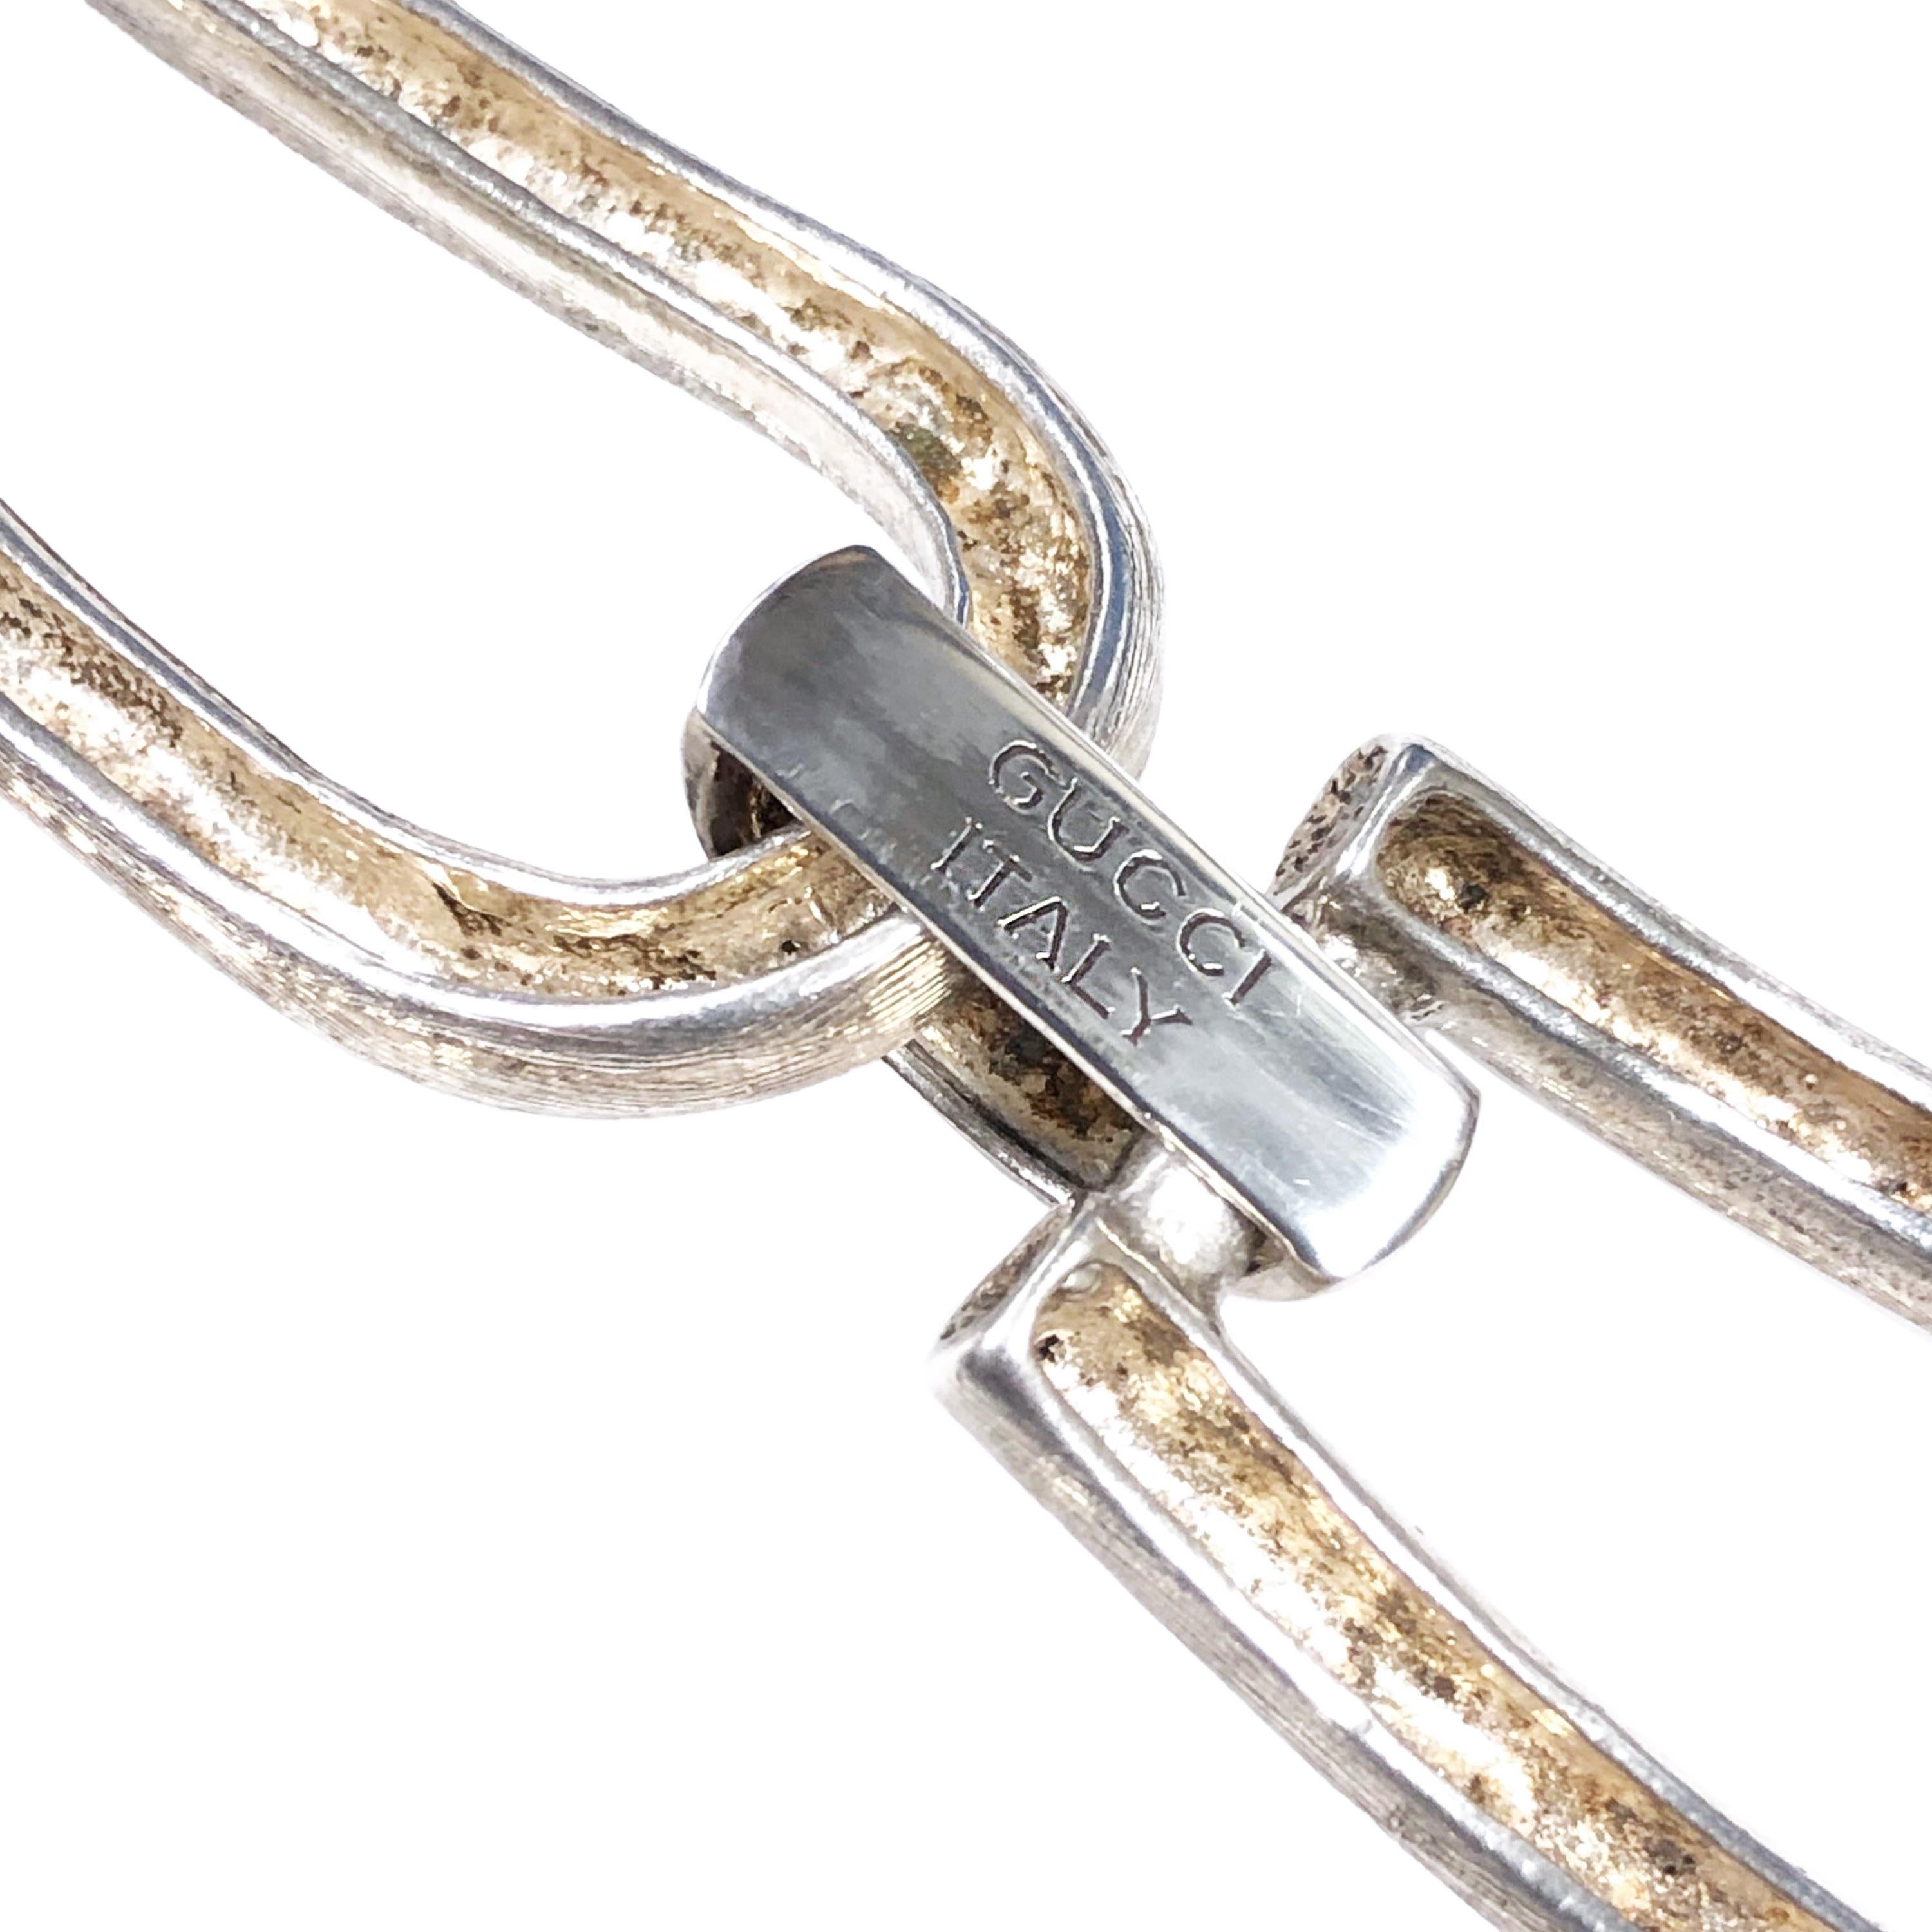 Circa 1960s Gucci Sterling Silver Link Bracelet, elongated Horse Shoe Shaped links measuring 7/8 inch wide and having a light brushed finish with the center links having a high polish for a nice contrast. The bracelet measures 7 1/2 inches in length.